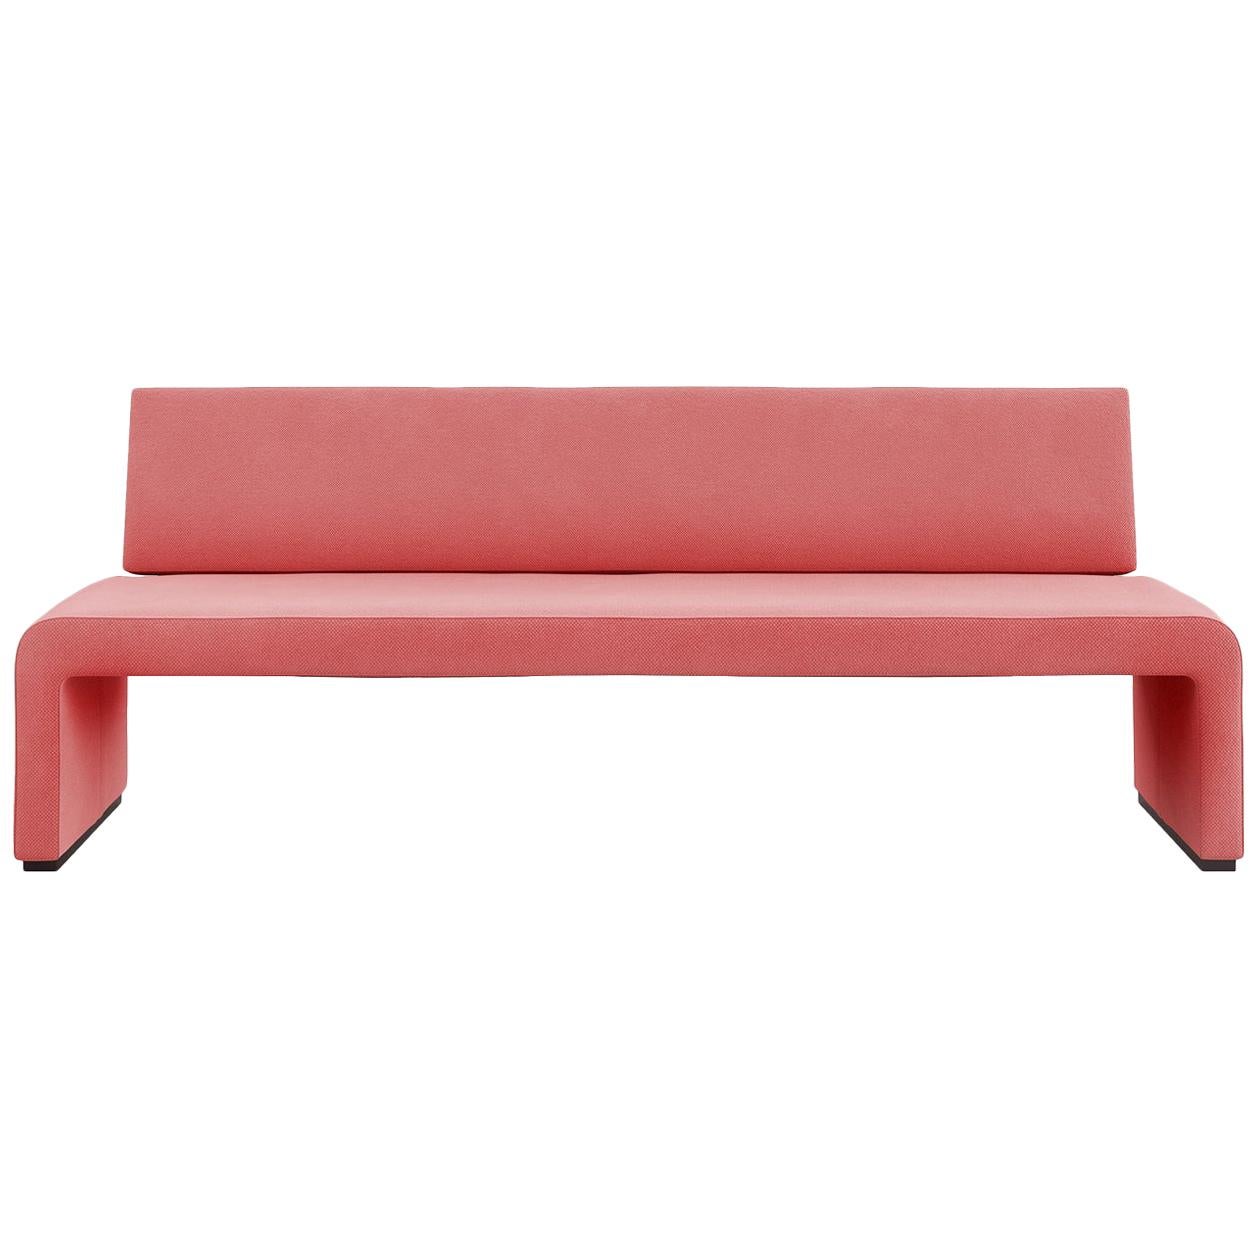 Tacchini Labanca Three-Seater Sofa in Pink Fabric by Lievore Altherr Molina